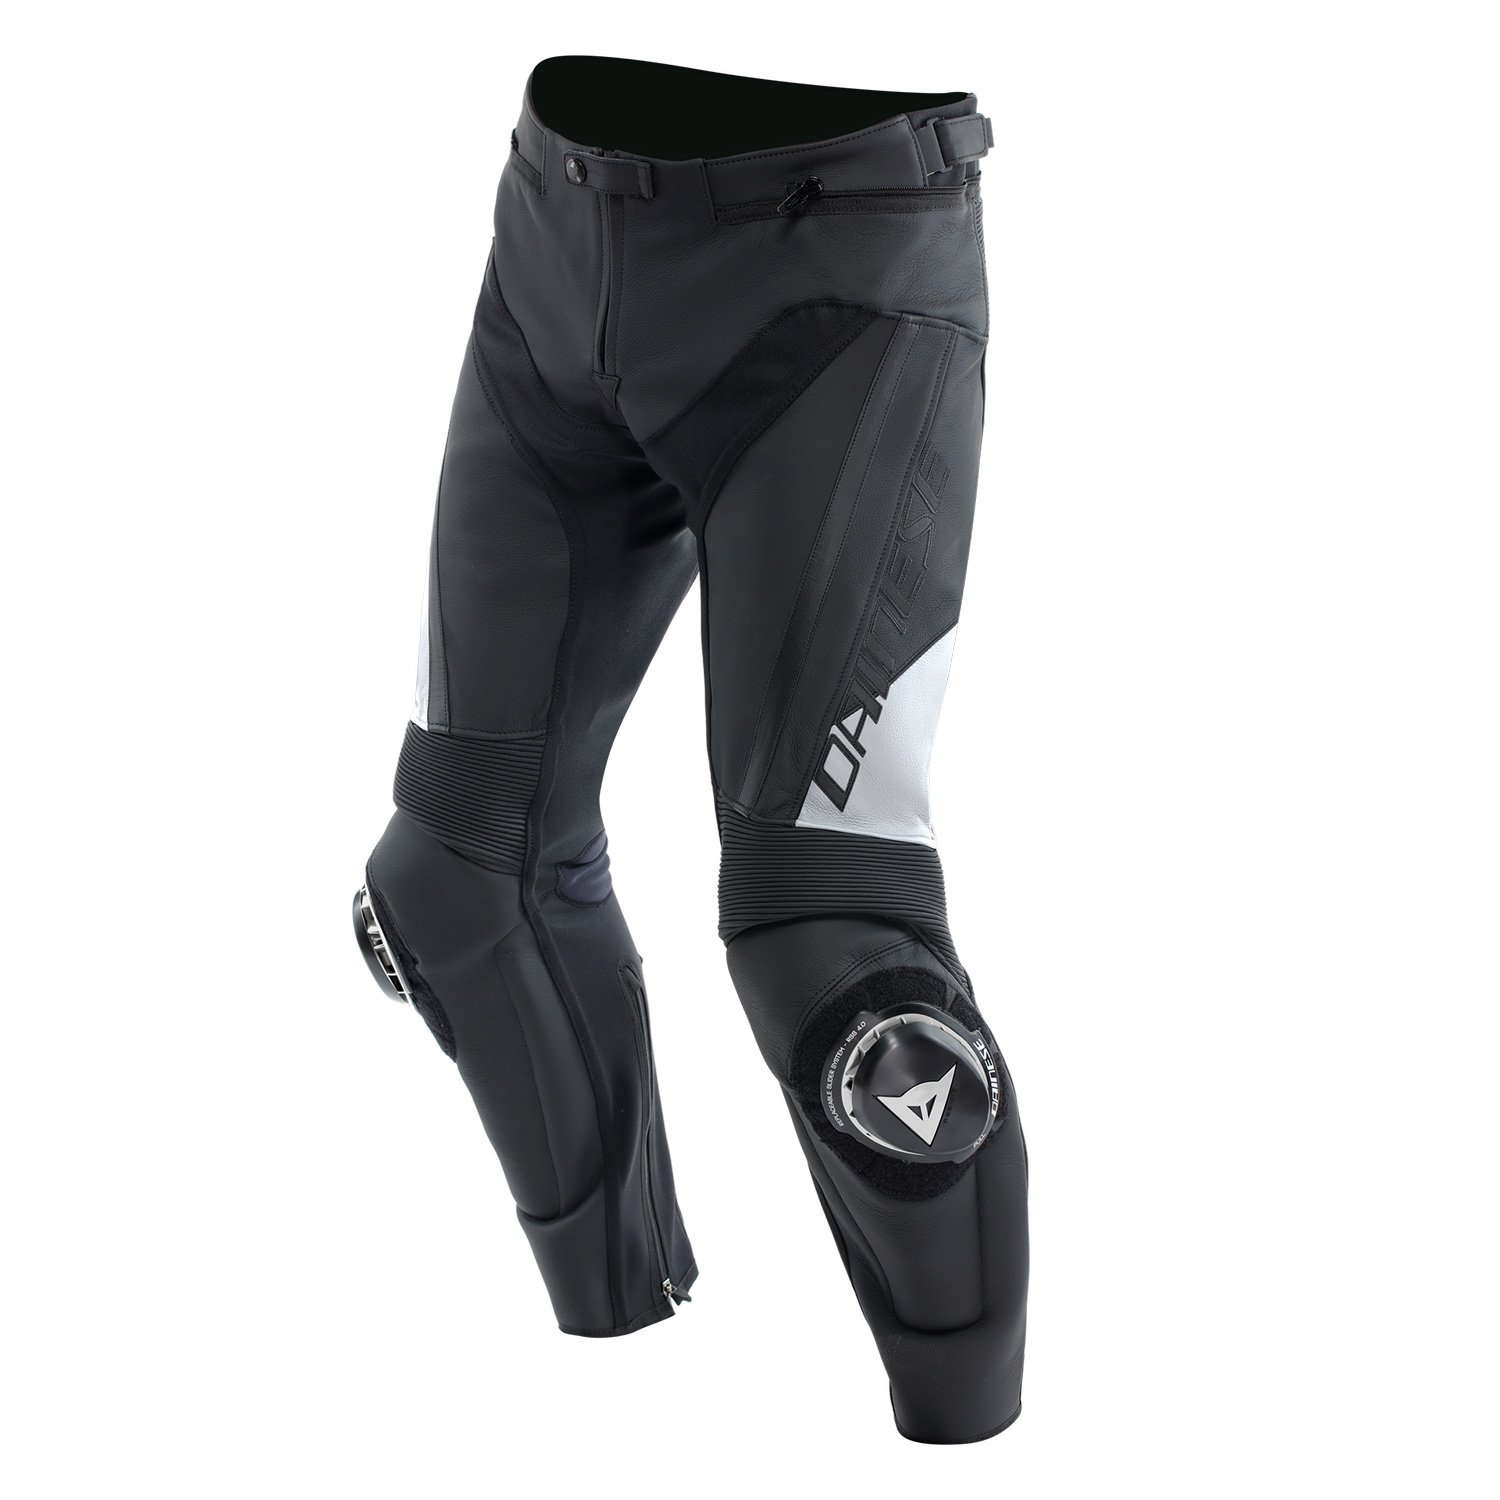 Image of Dainese Delta 4 Leather Pants Black White Size 62 ID 8051019640406